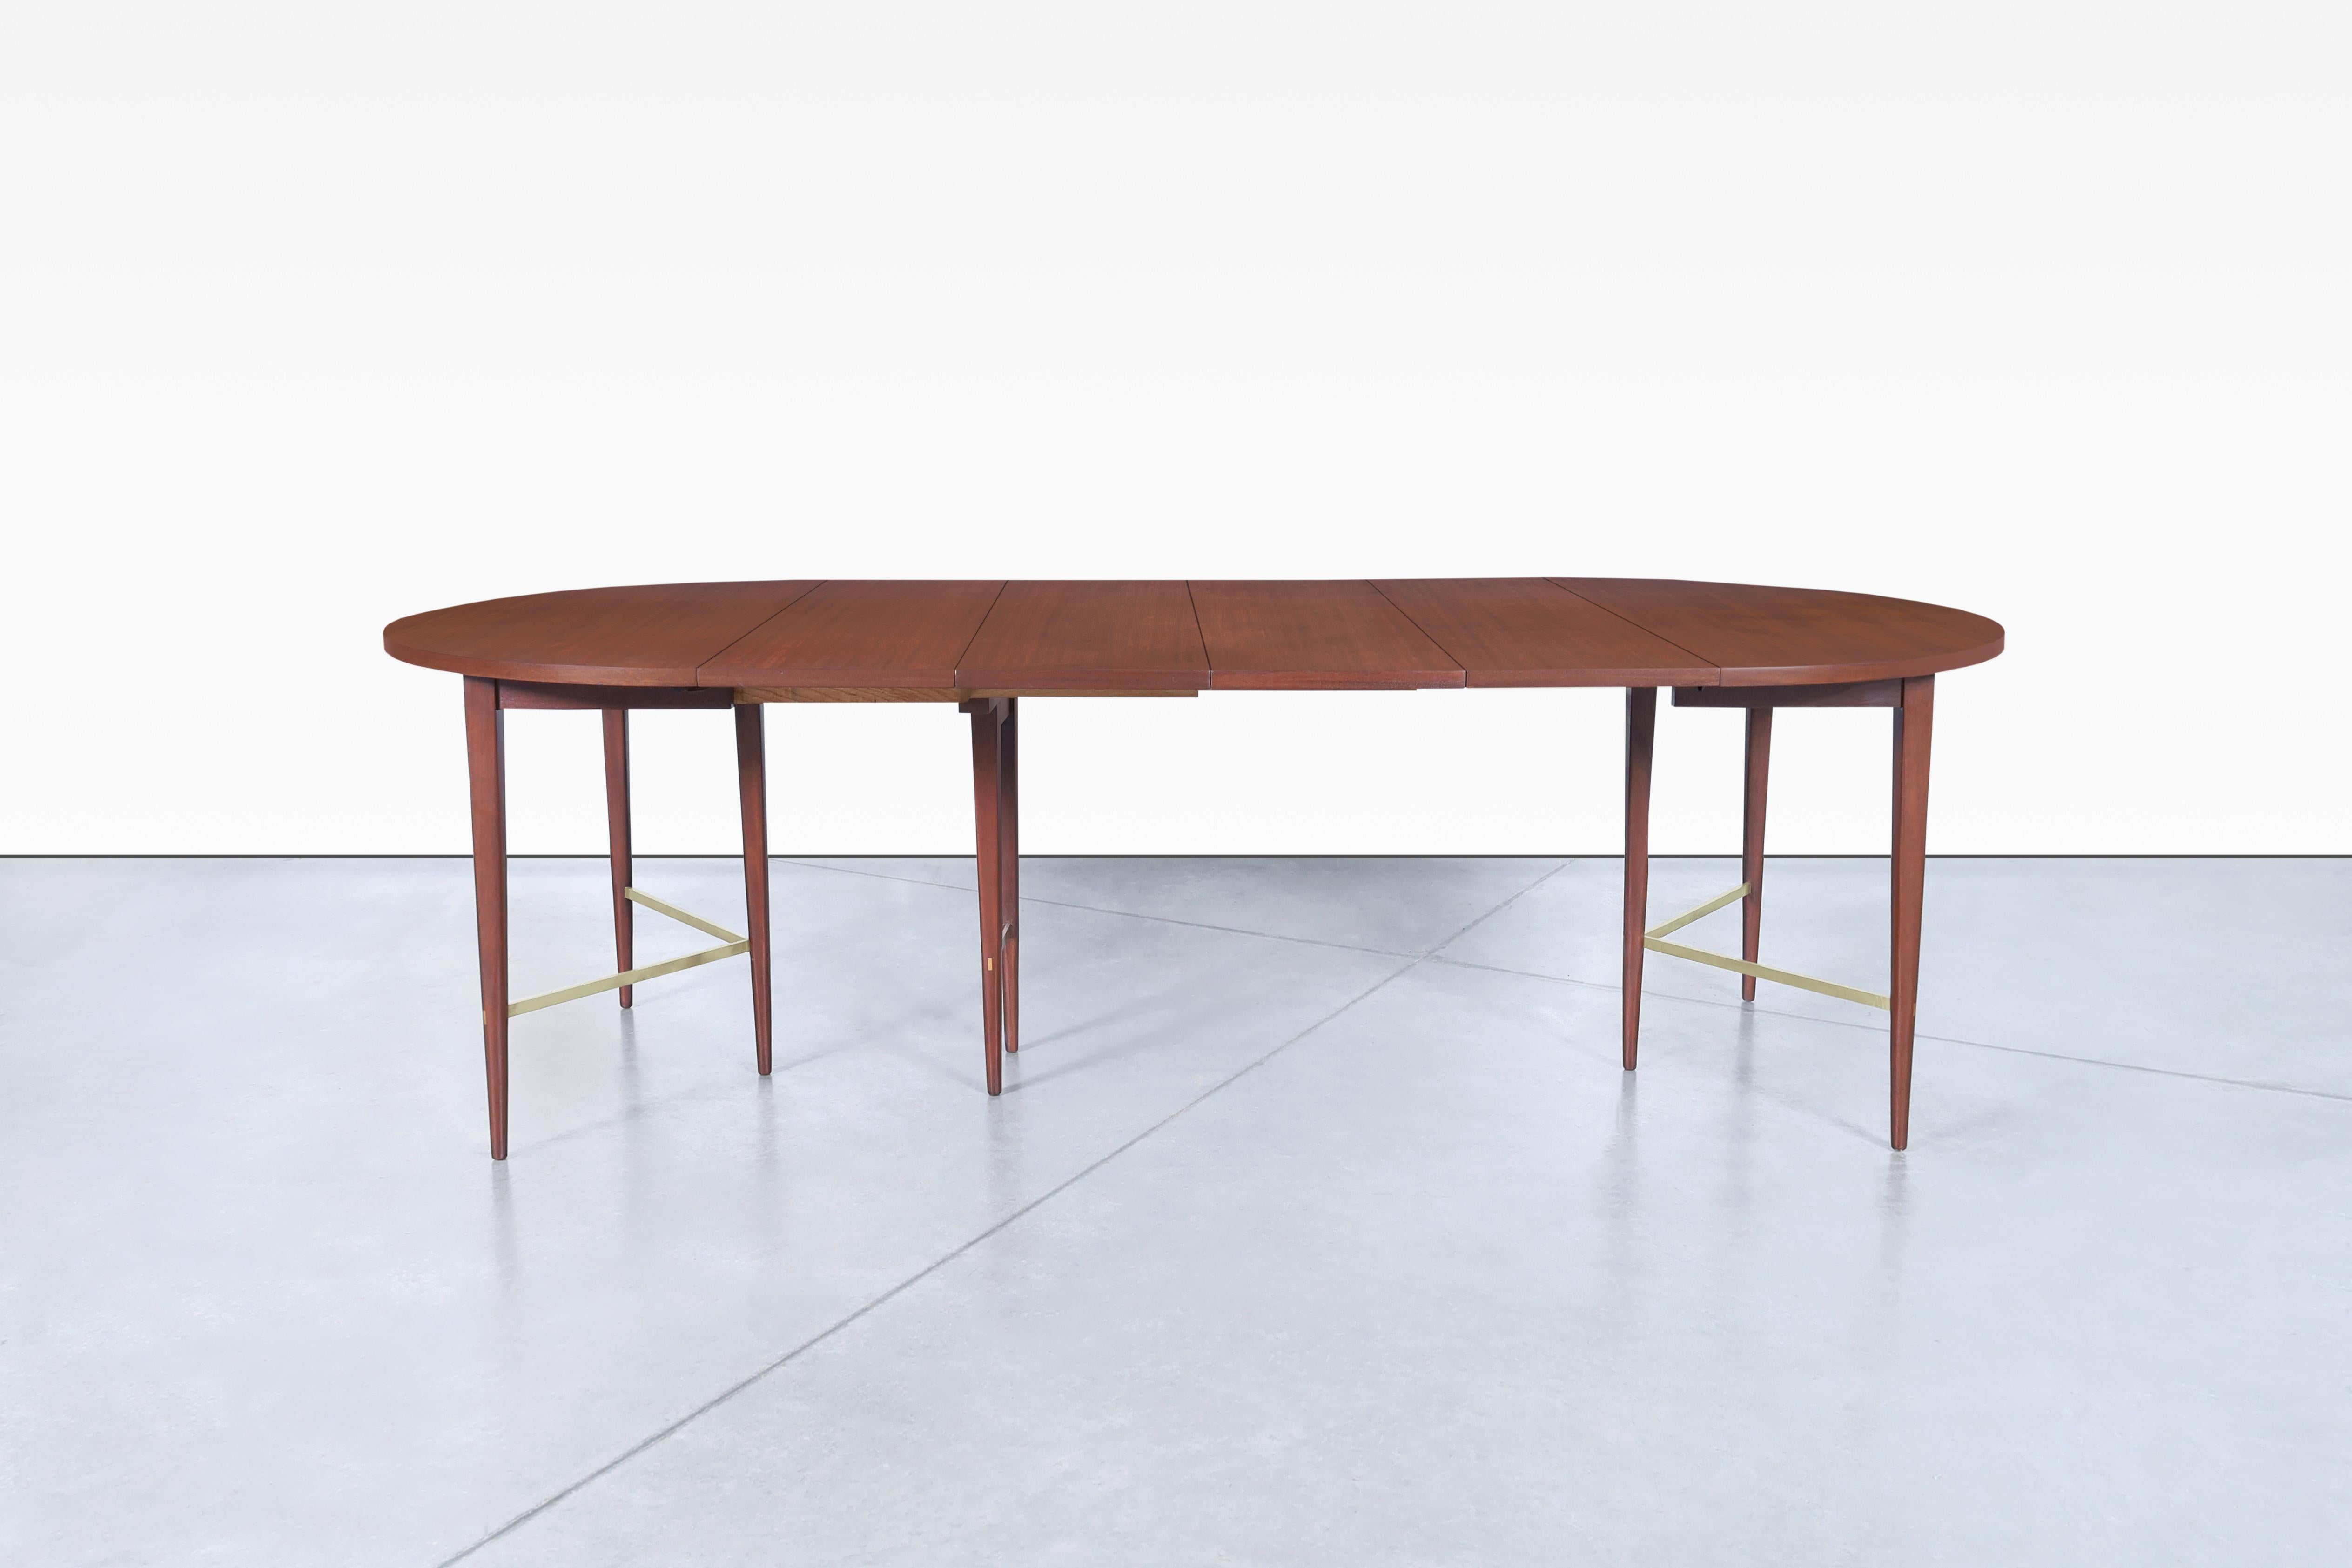 This stunning vintage dining table is a true masterpiece of mid-century design. Crafted from rich mahogany and solid brass, it was designed by the iconic Paul McCobb for Calvin Furniture as part of the Irwin Collection. The table features McCobb's